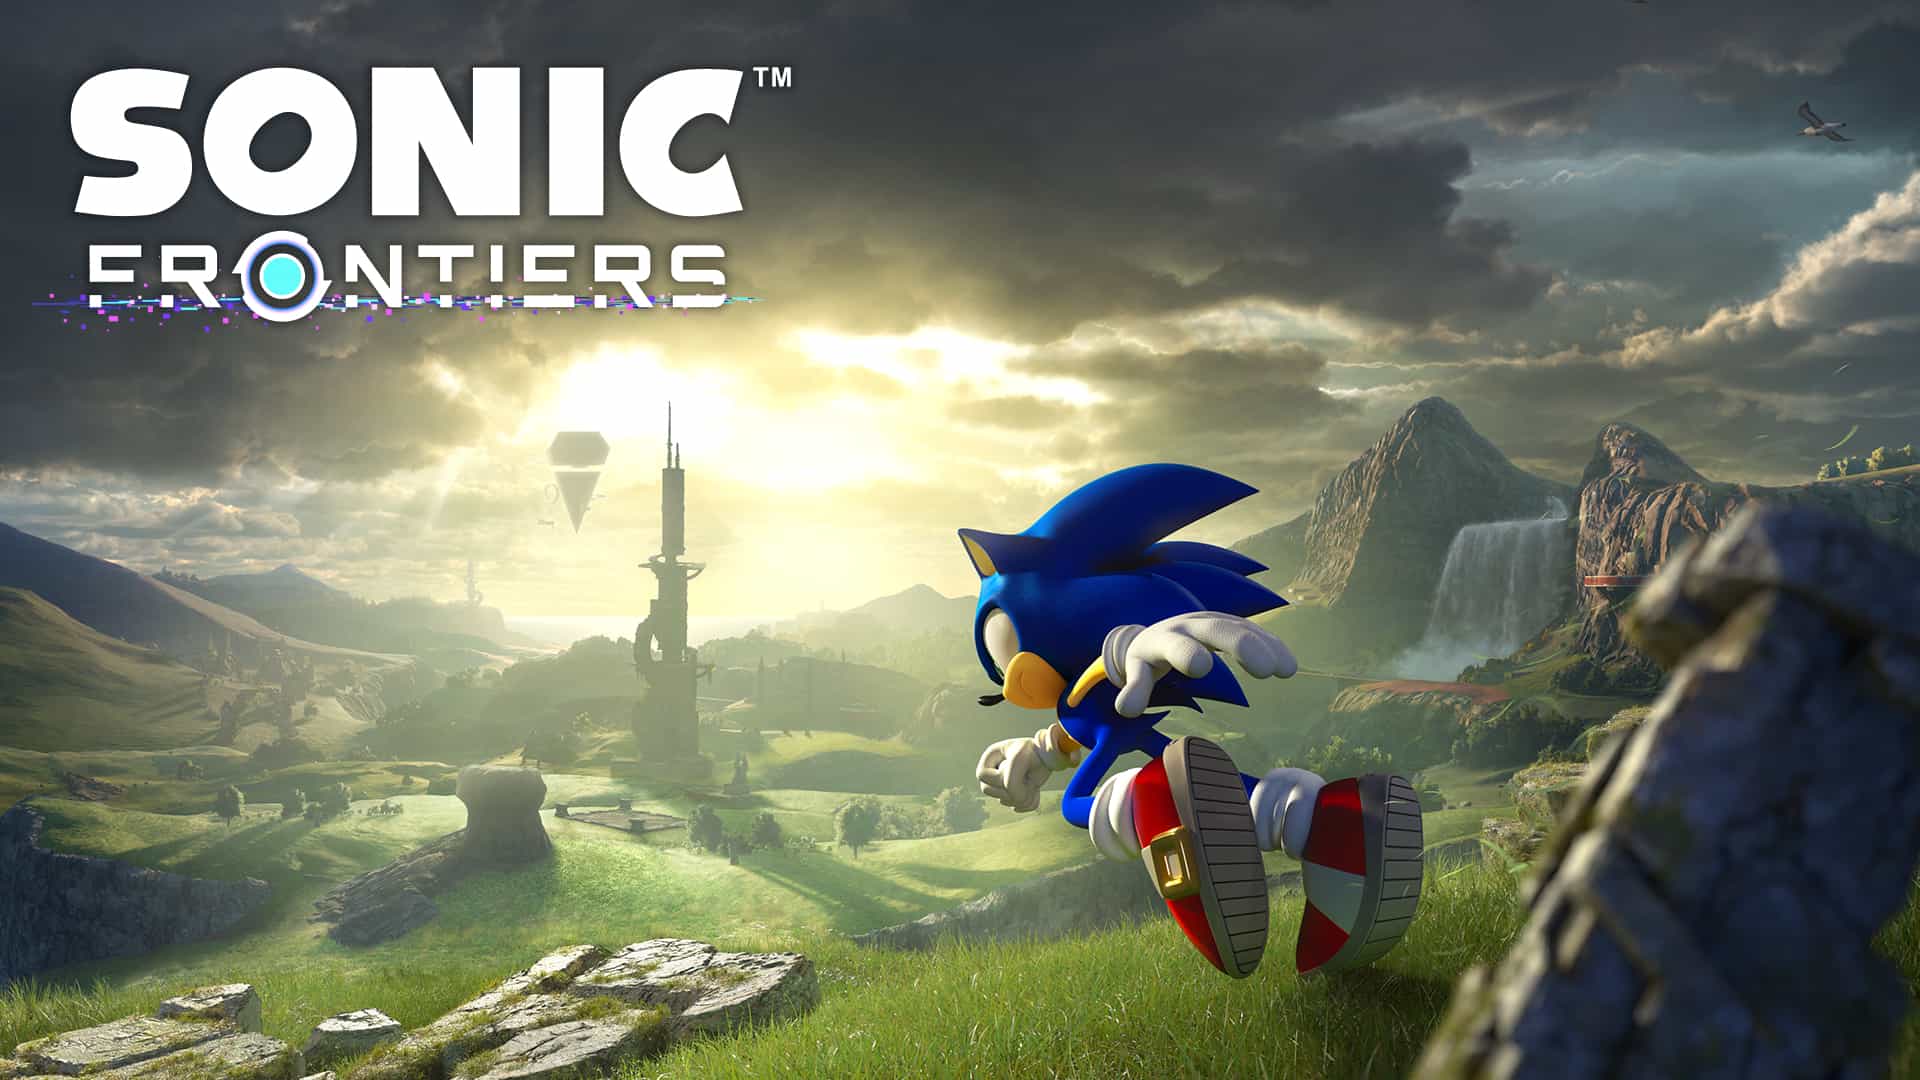 Sonic Frontiers' to receive free 'Monster Hunter' DLC